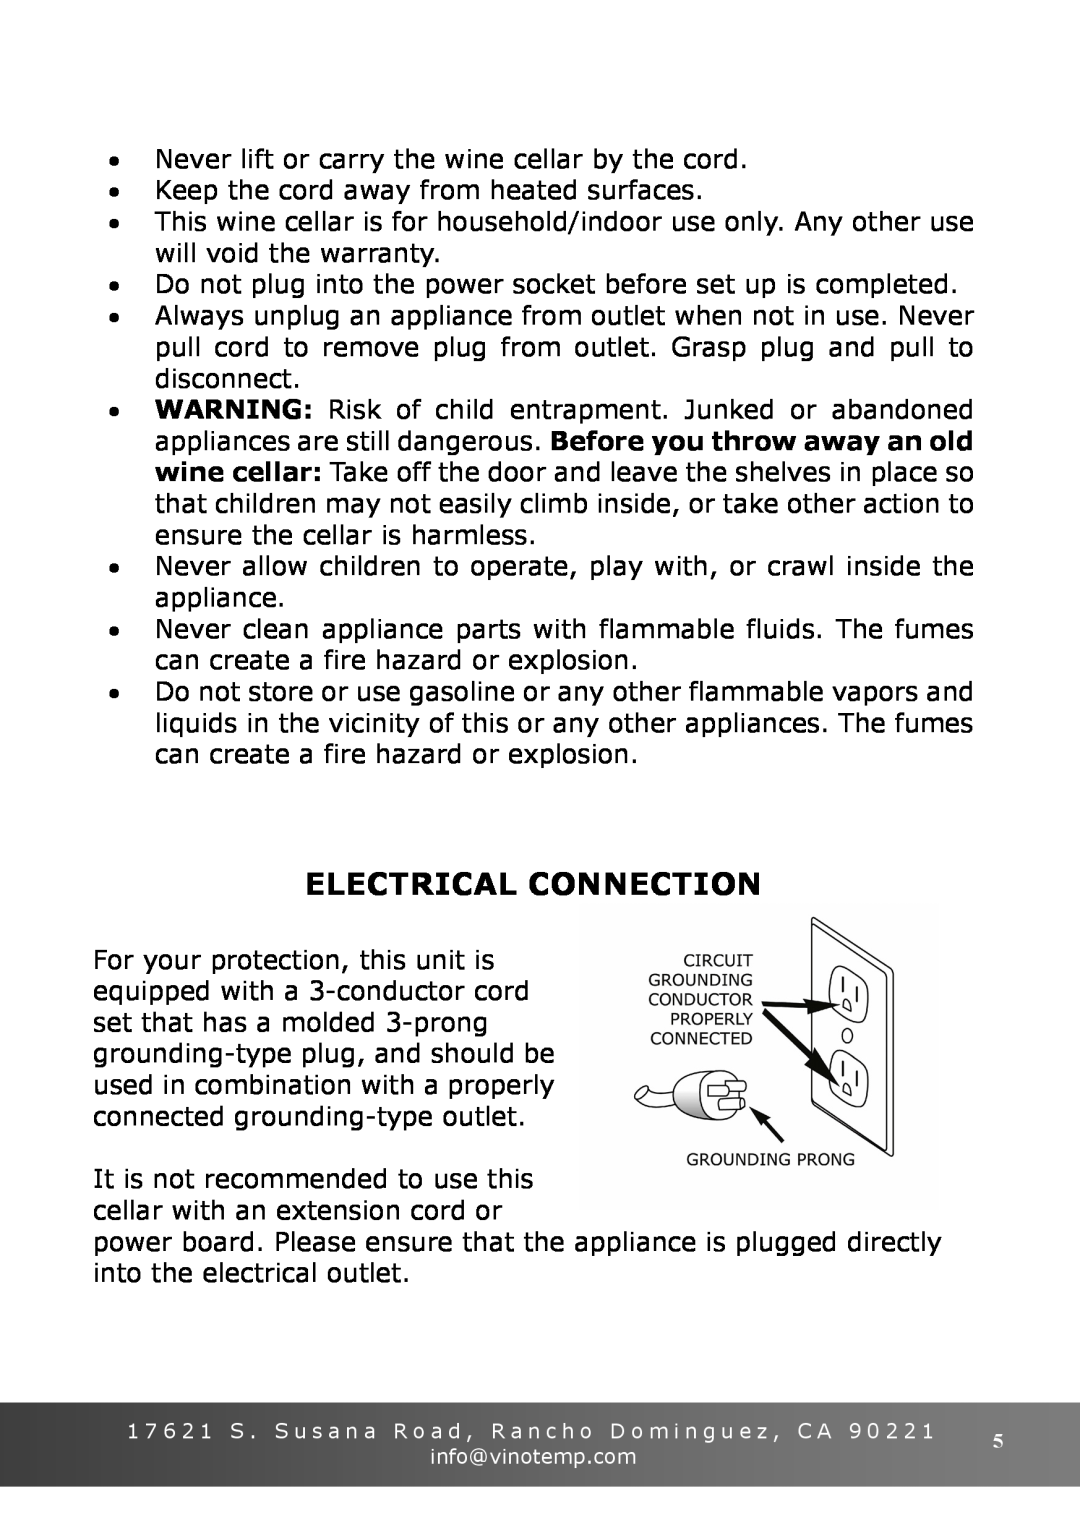 Vinotemp VT-15 TS owner manual Electrical Connection 